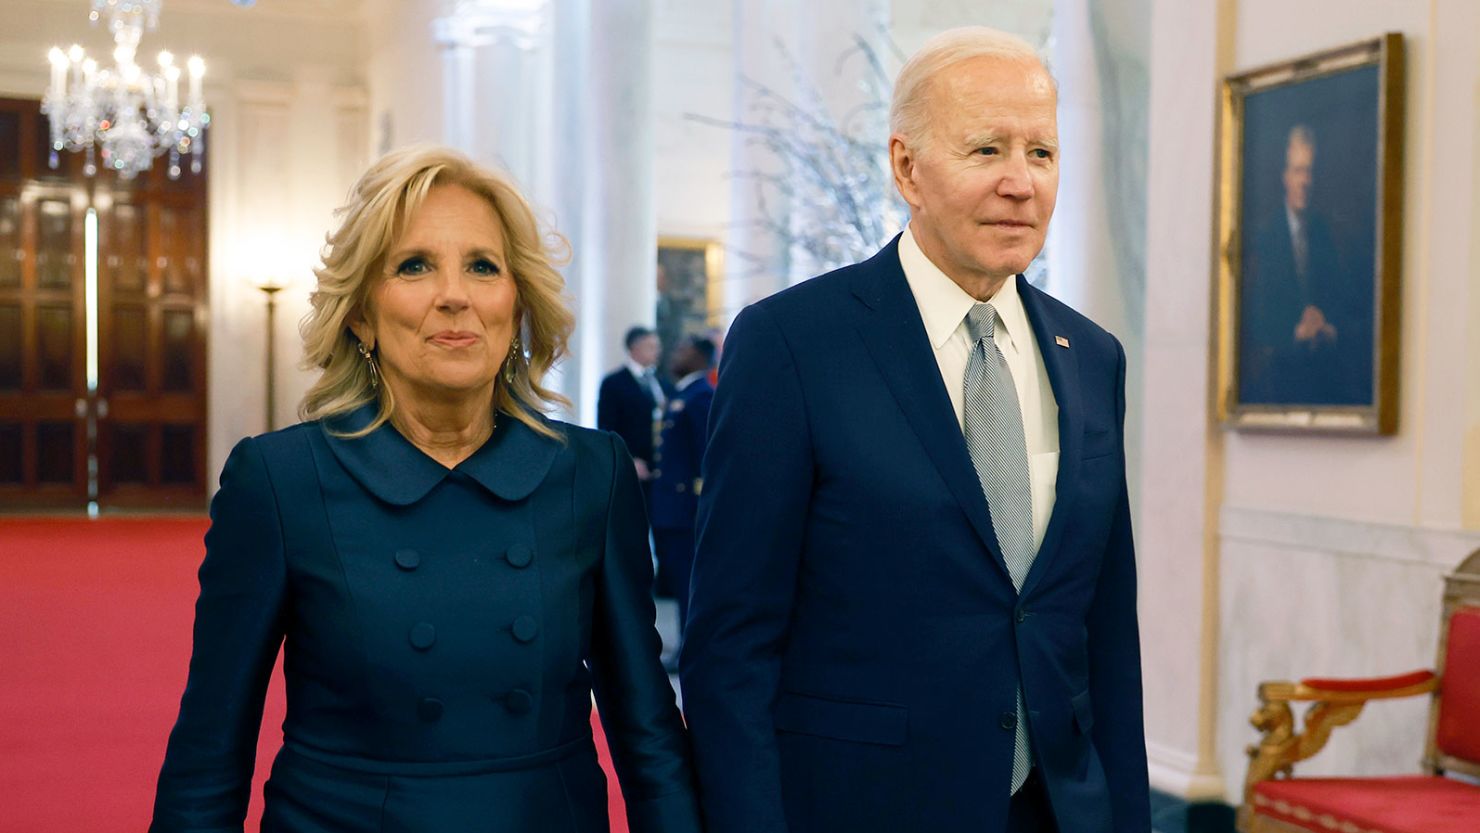 President Joe Biden and first lady Jill Biden arrive for a ceremony honoring the recipients of the 2021 National Humanities Medals and the 2021 National Medals of Arts in the East Room of the White House on March 21, 2023.